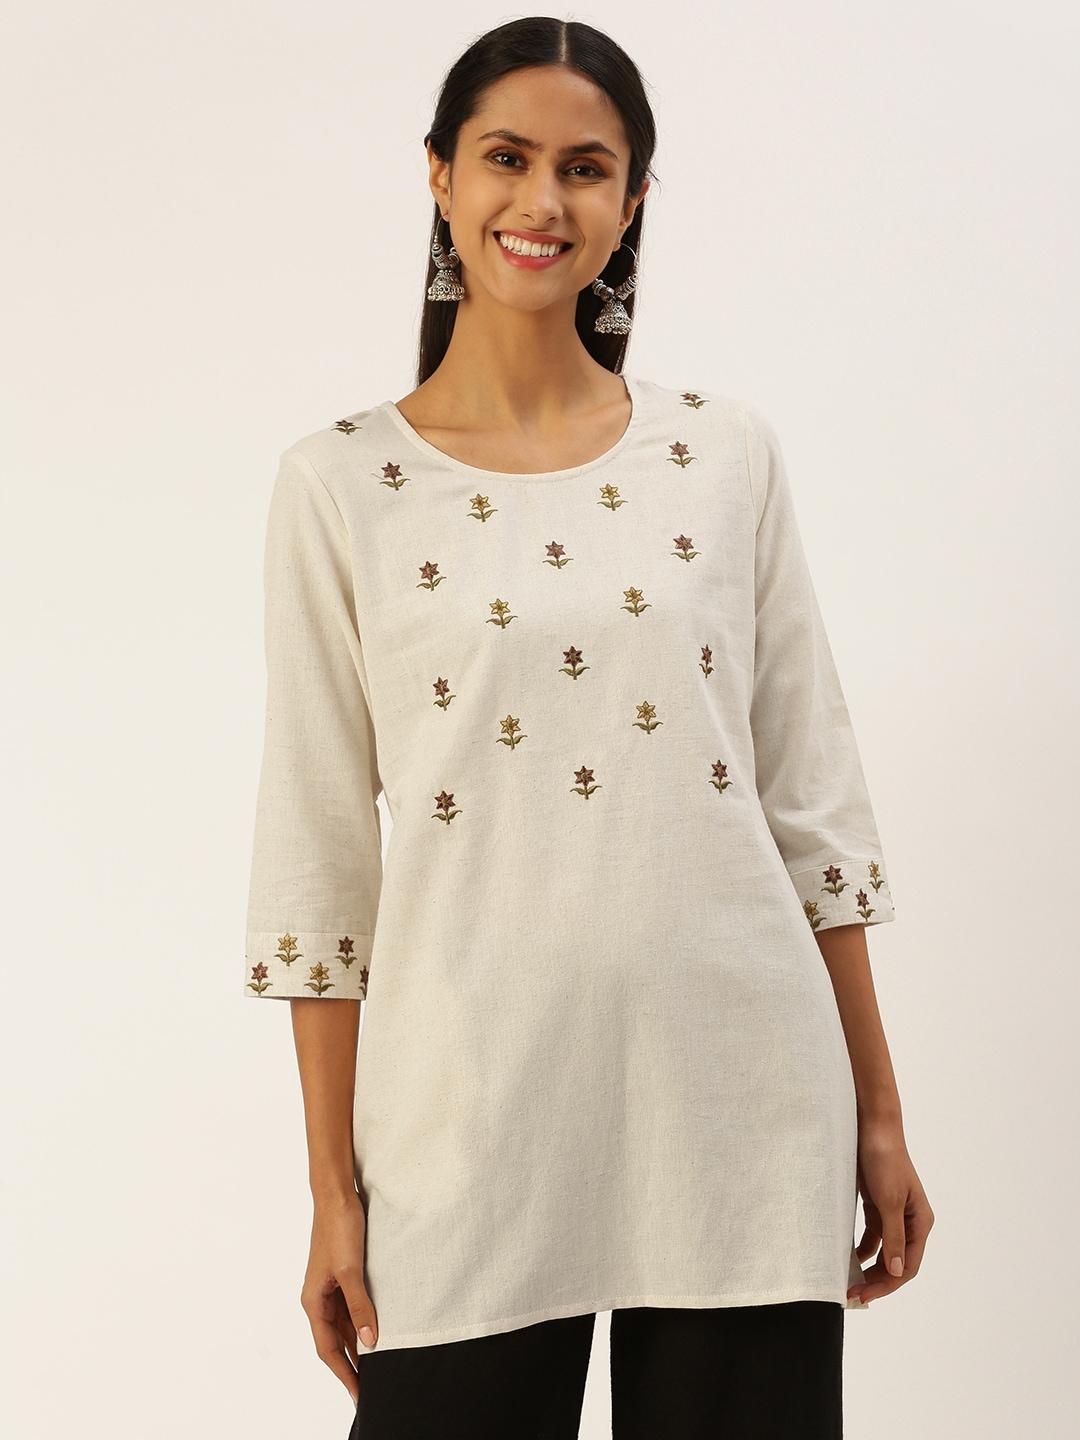 amukti-floral-embroidered-tunic